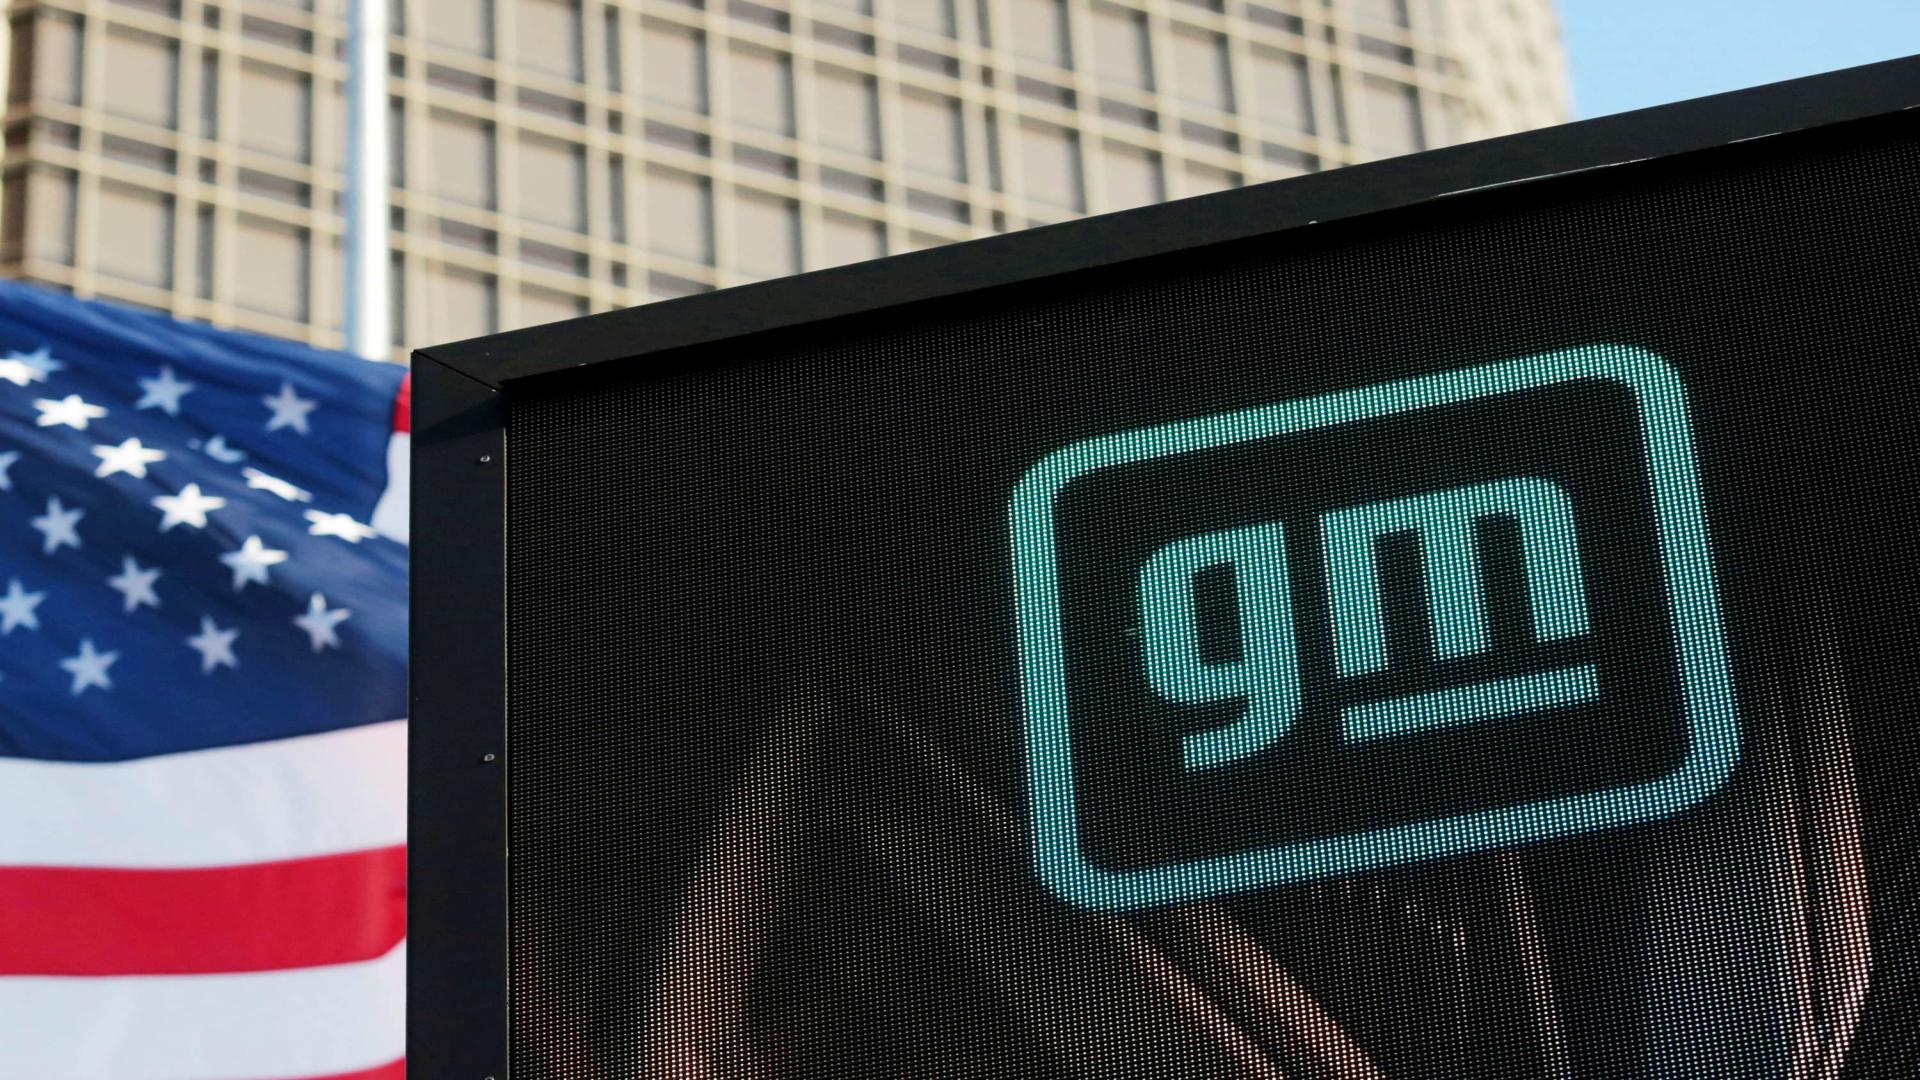 General Motors is set to report earnings before the bell. Here's what Wall Street expects